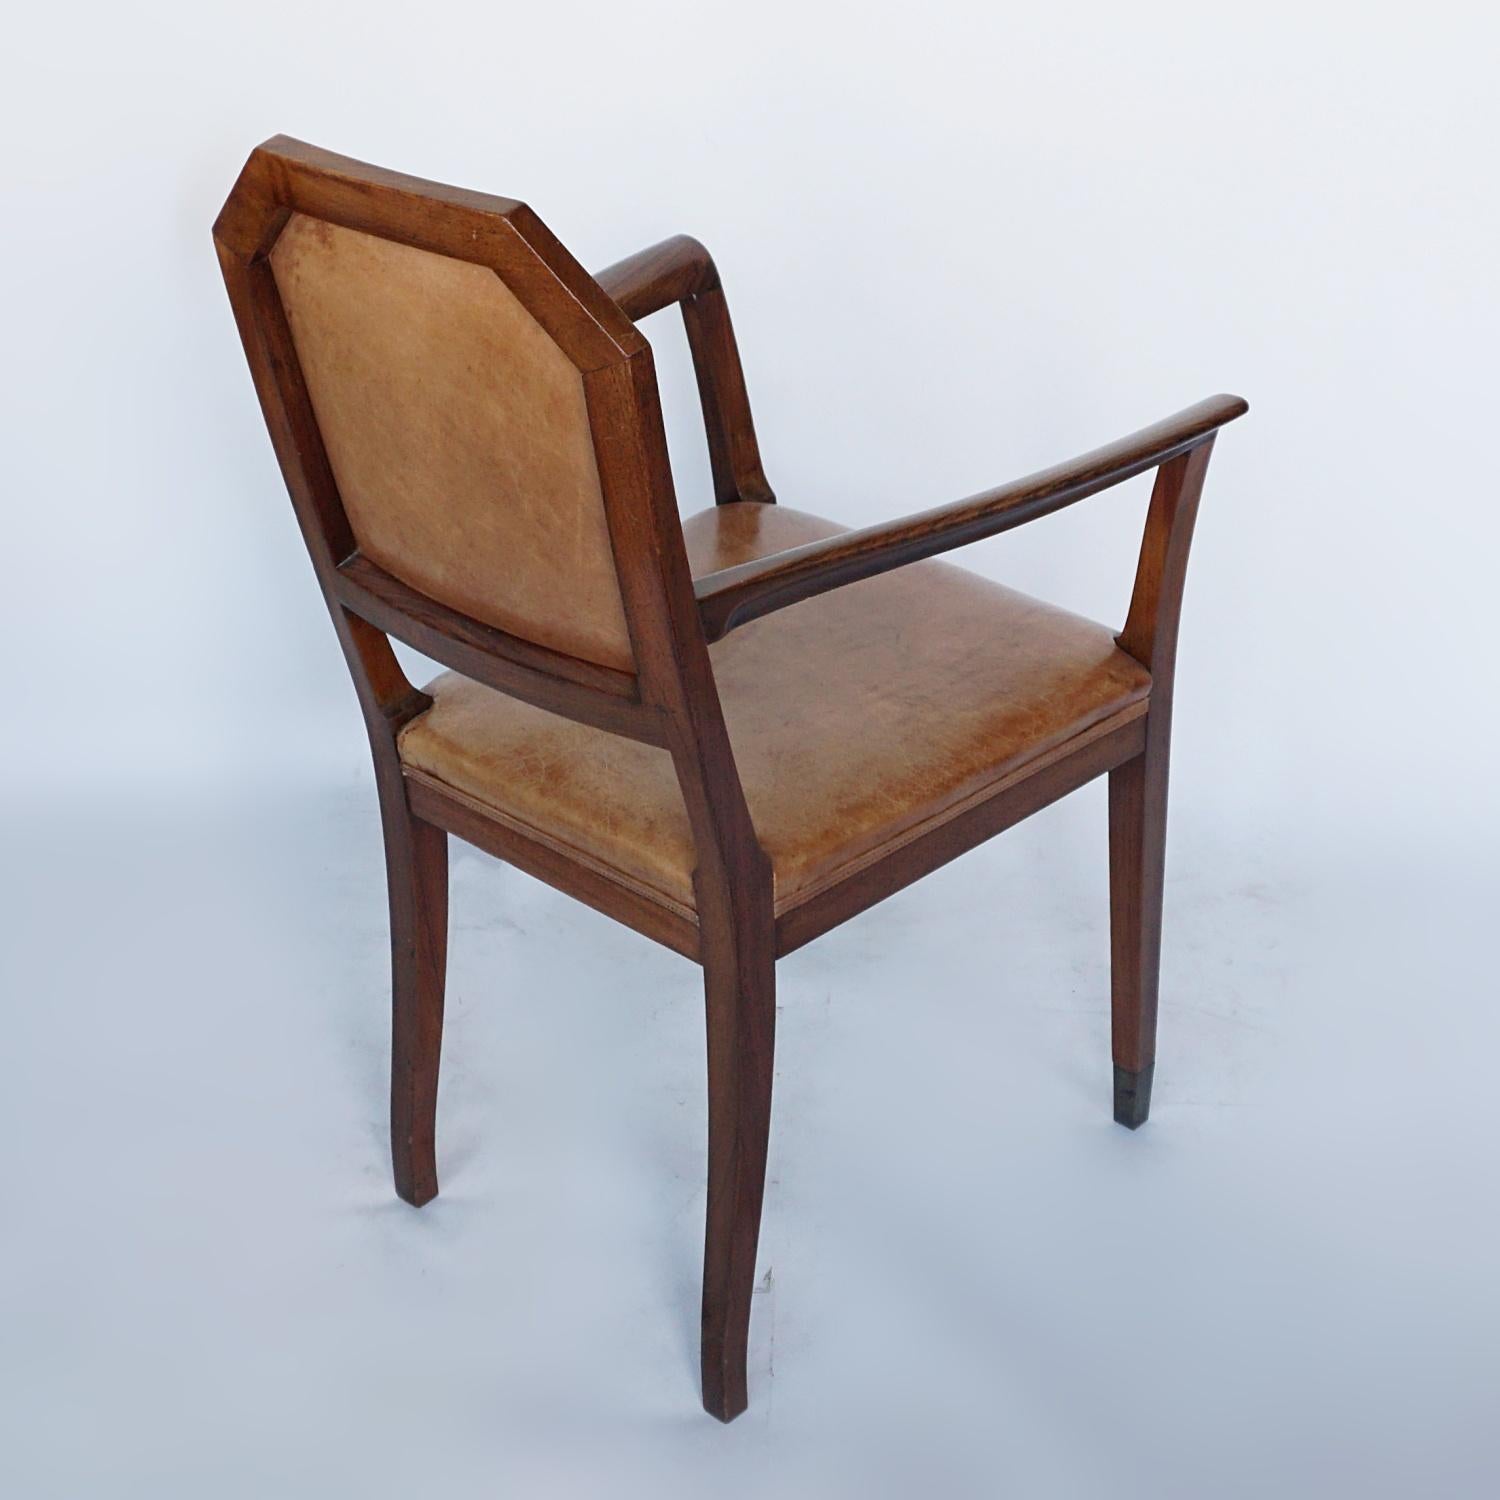 French Art Deco Desk Chair Walnut and Leather, Circa 1925 4